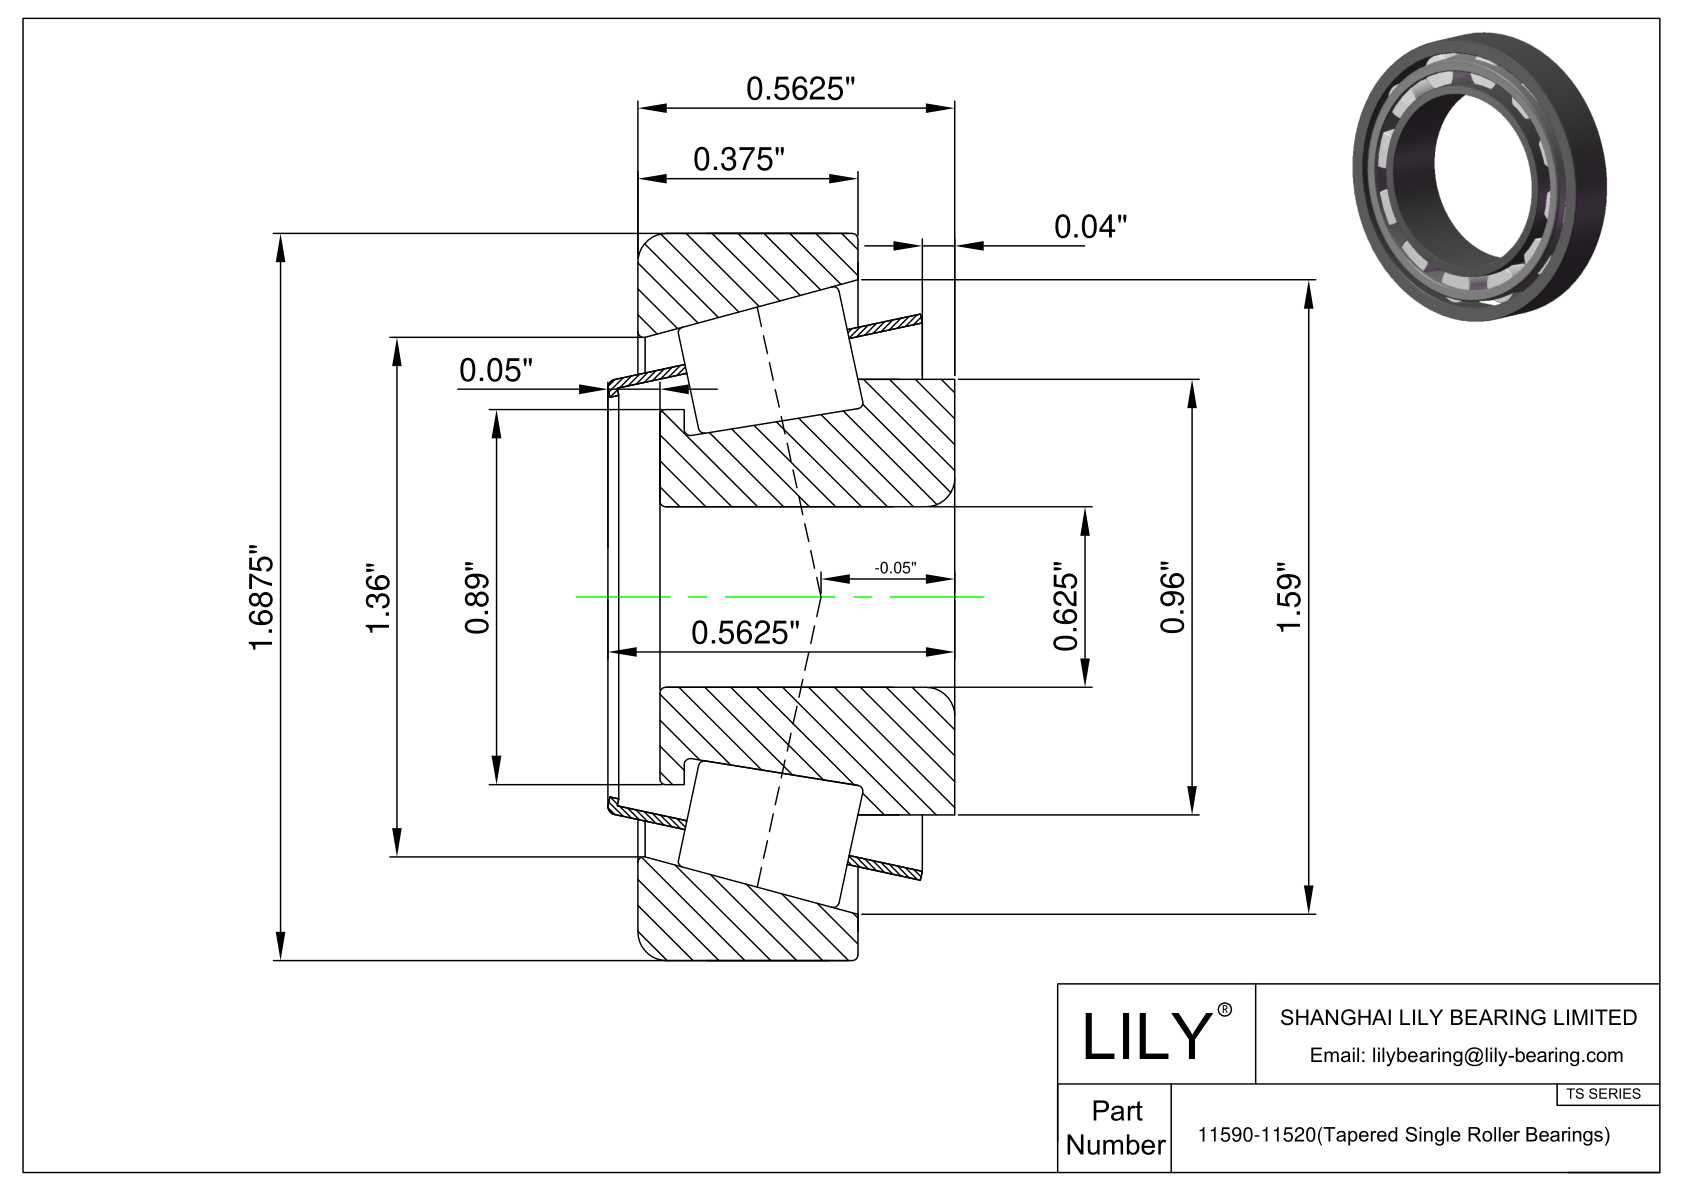 11590-11520 TS (Tapered Single Roller Bearings) (Imperial) cad drawing